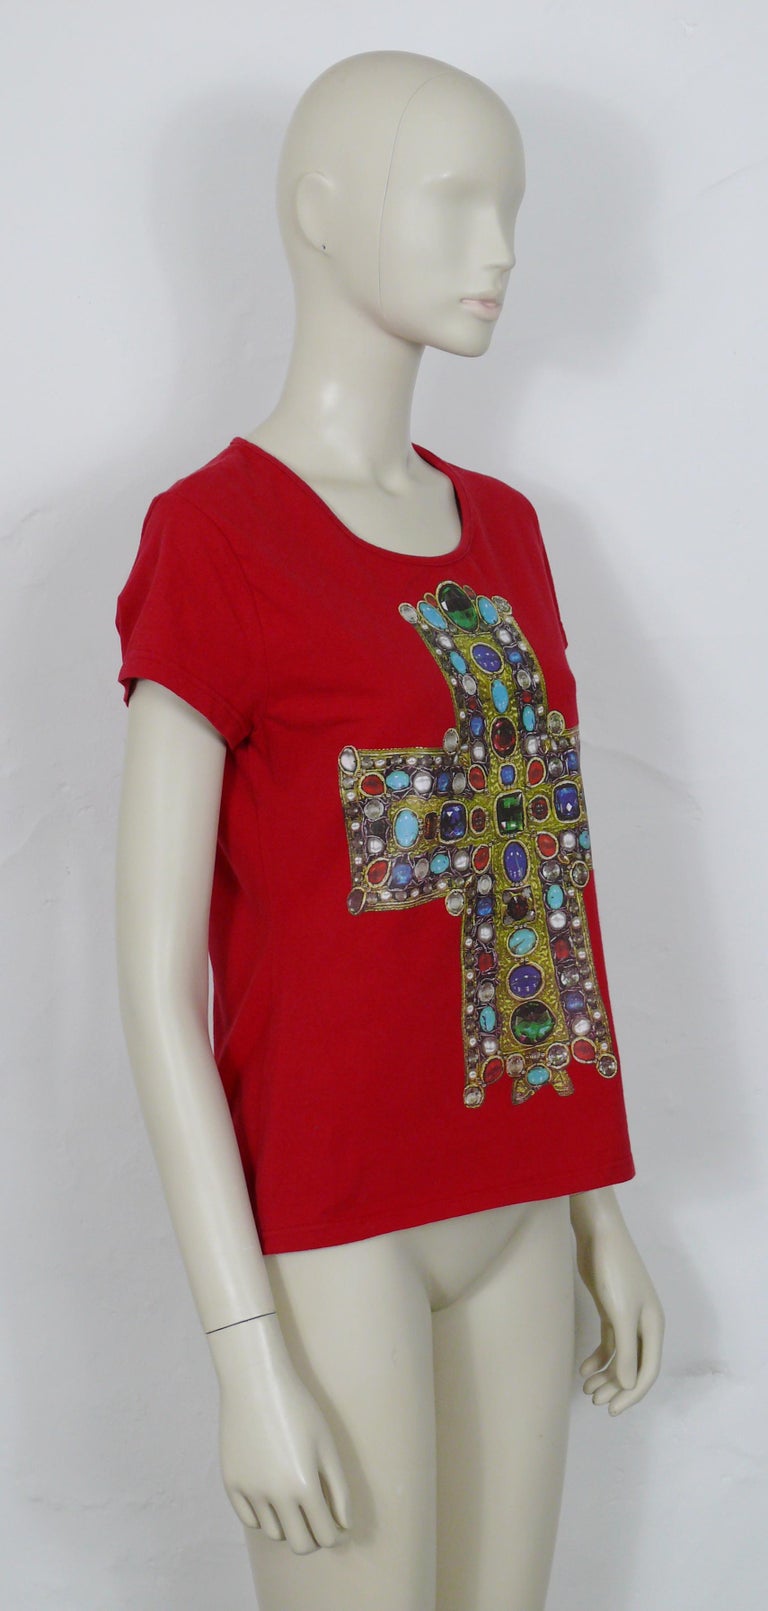 CHRISTIAN LACROIX vintage red short sleeve top featuring an iconic large jewelled cross print on the front.

Label reads 15 CHRISTIAN LACROIX.
Made in Greece.

Size tag reads : L.
Please refer to measurements.

Composition tag reads : 95% Cotton /